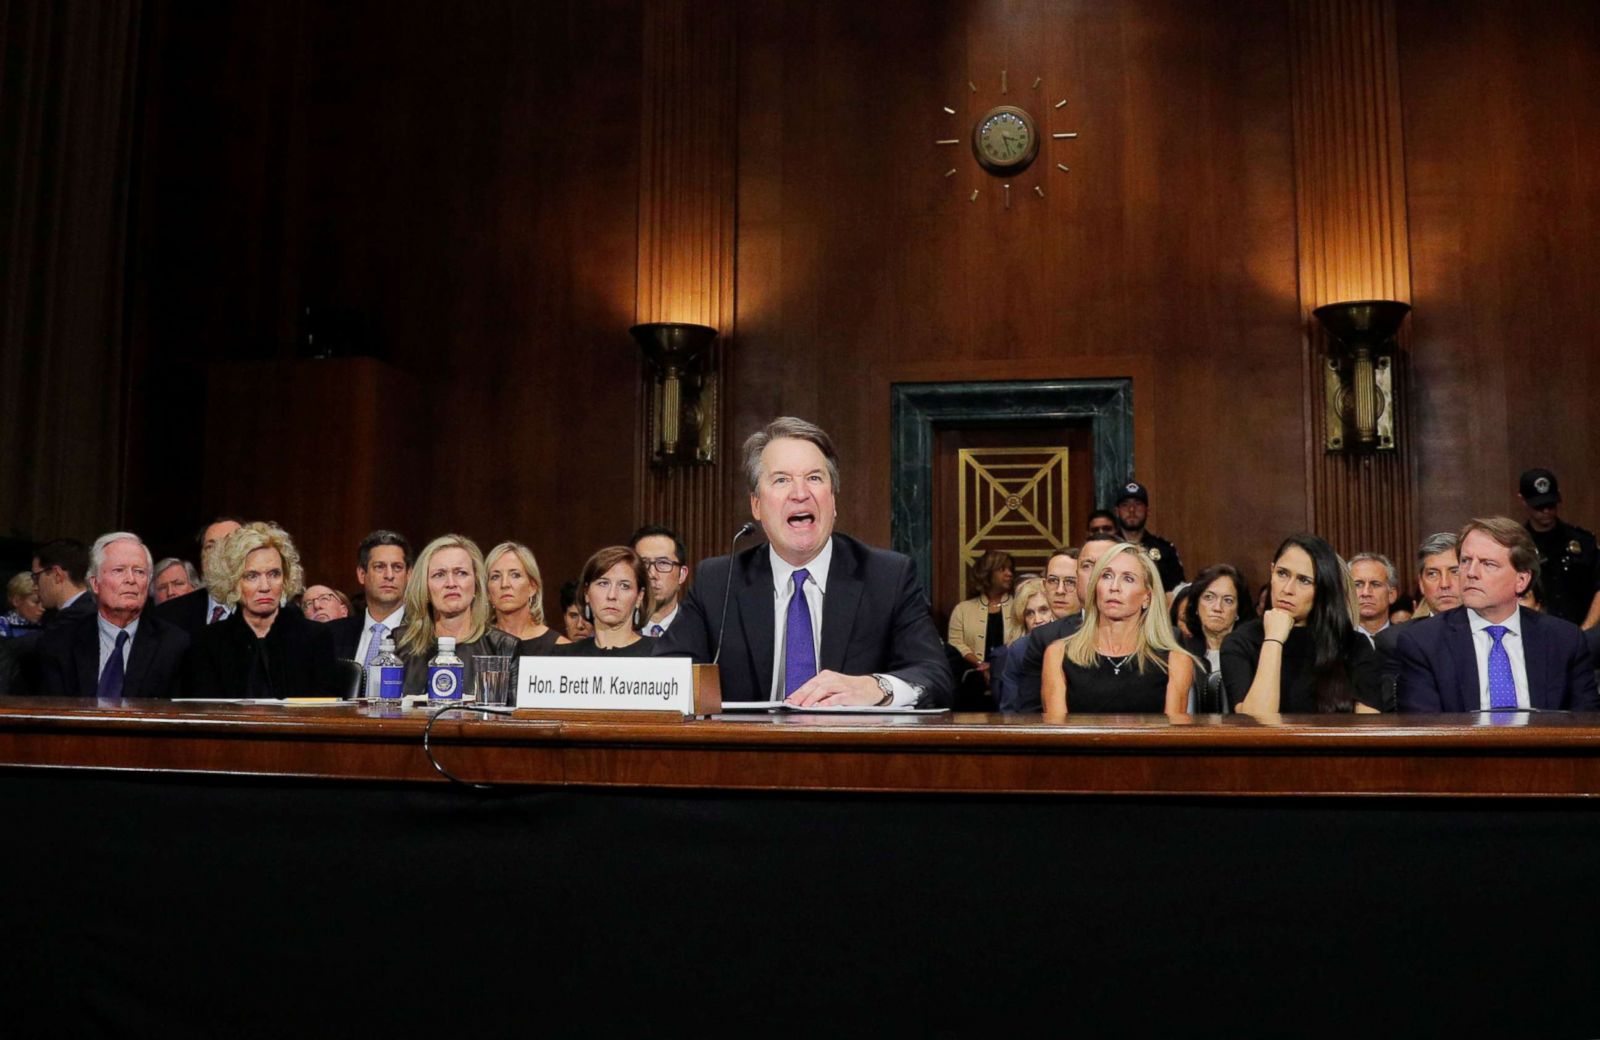 Photos Reveal The Drama Of The Kavanaugh Hearing And Christine Blasey Fords Testimony Photos 5693